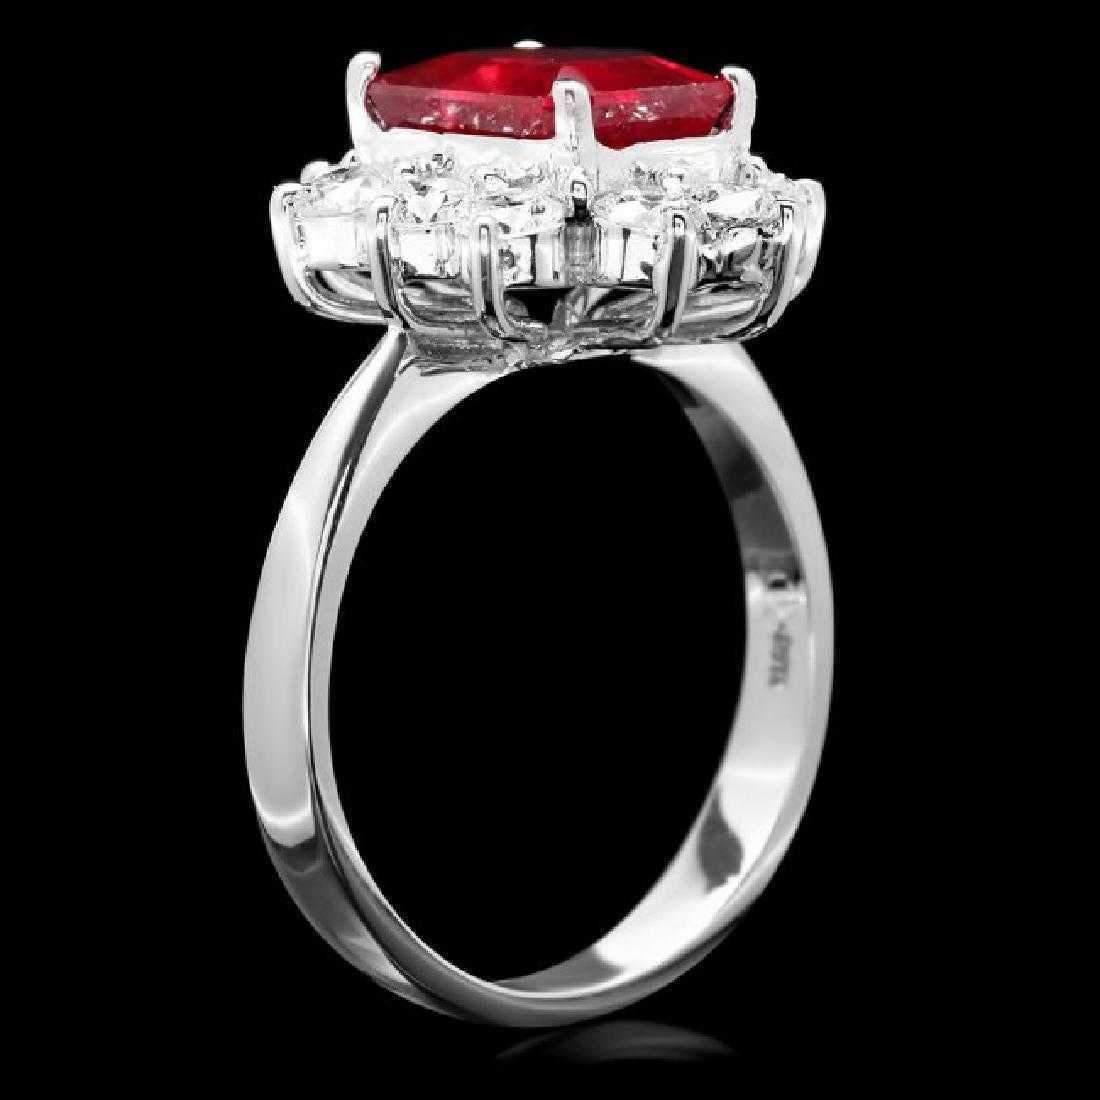 4.10 Carats Impressive Natural Red Ruby and Diamond 14K White Gold Ring

Total Red Ruby Weight is: Approx. 3.00 Carats

Ruby Measures: Approx. 9.00 x 7.00mm

Ruby Treatment: Lead Glass Filling

Natural Round Diamonds Weight: Approx. 1.10 Carats